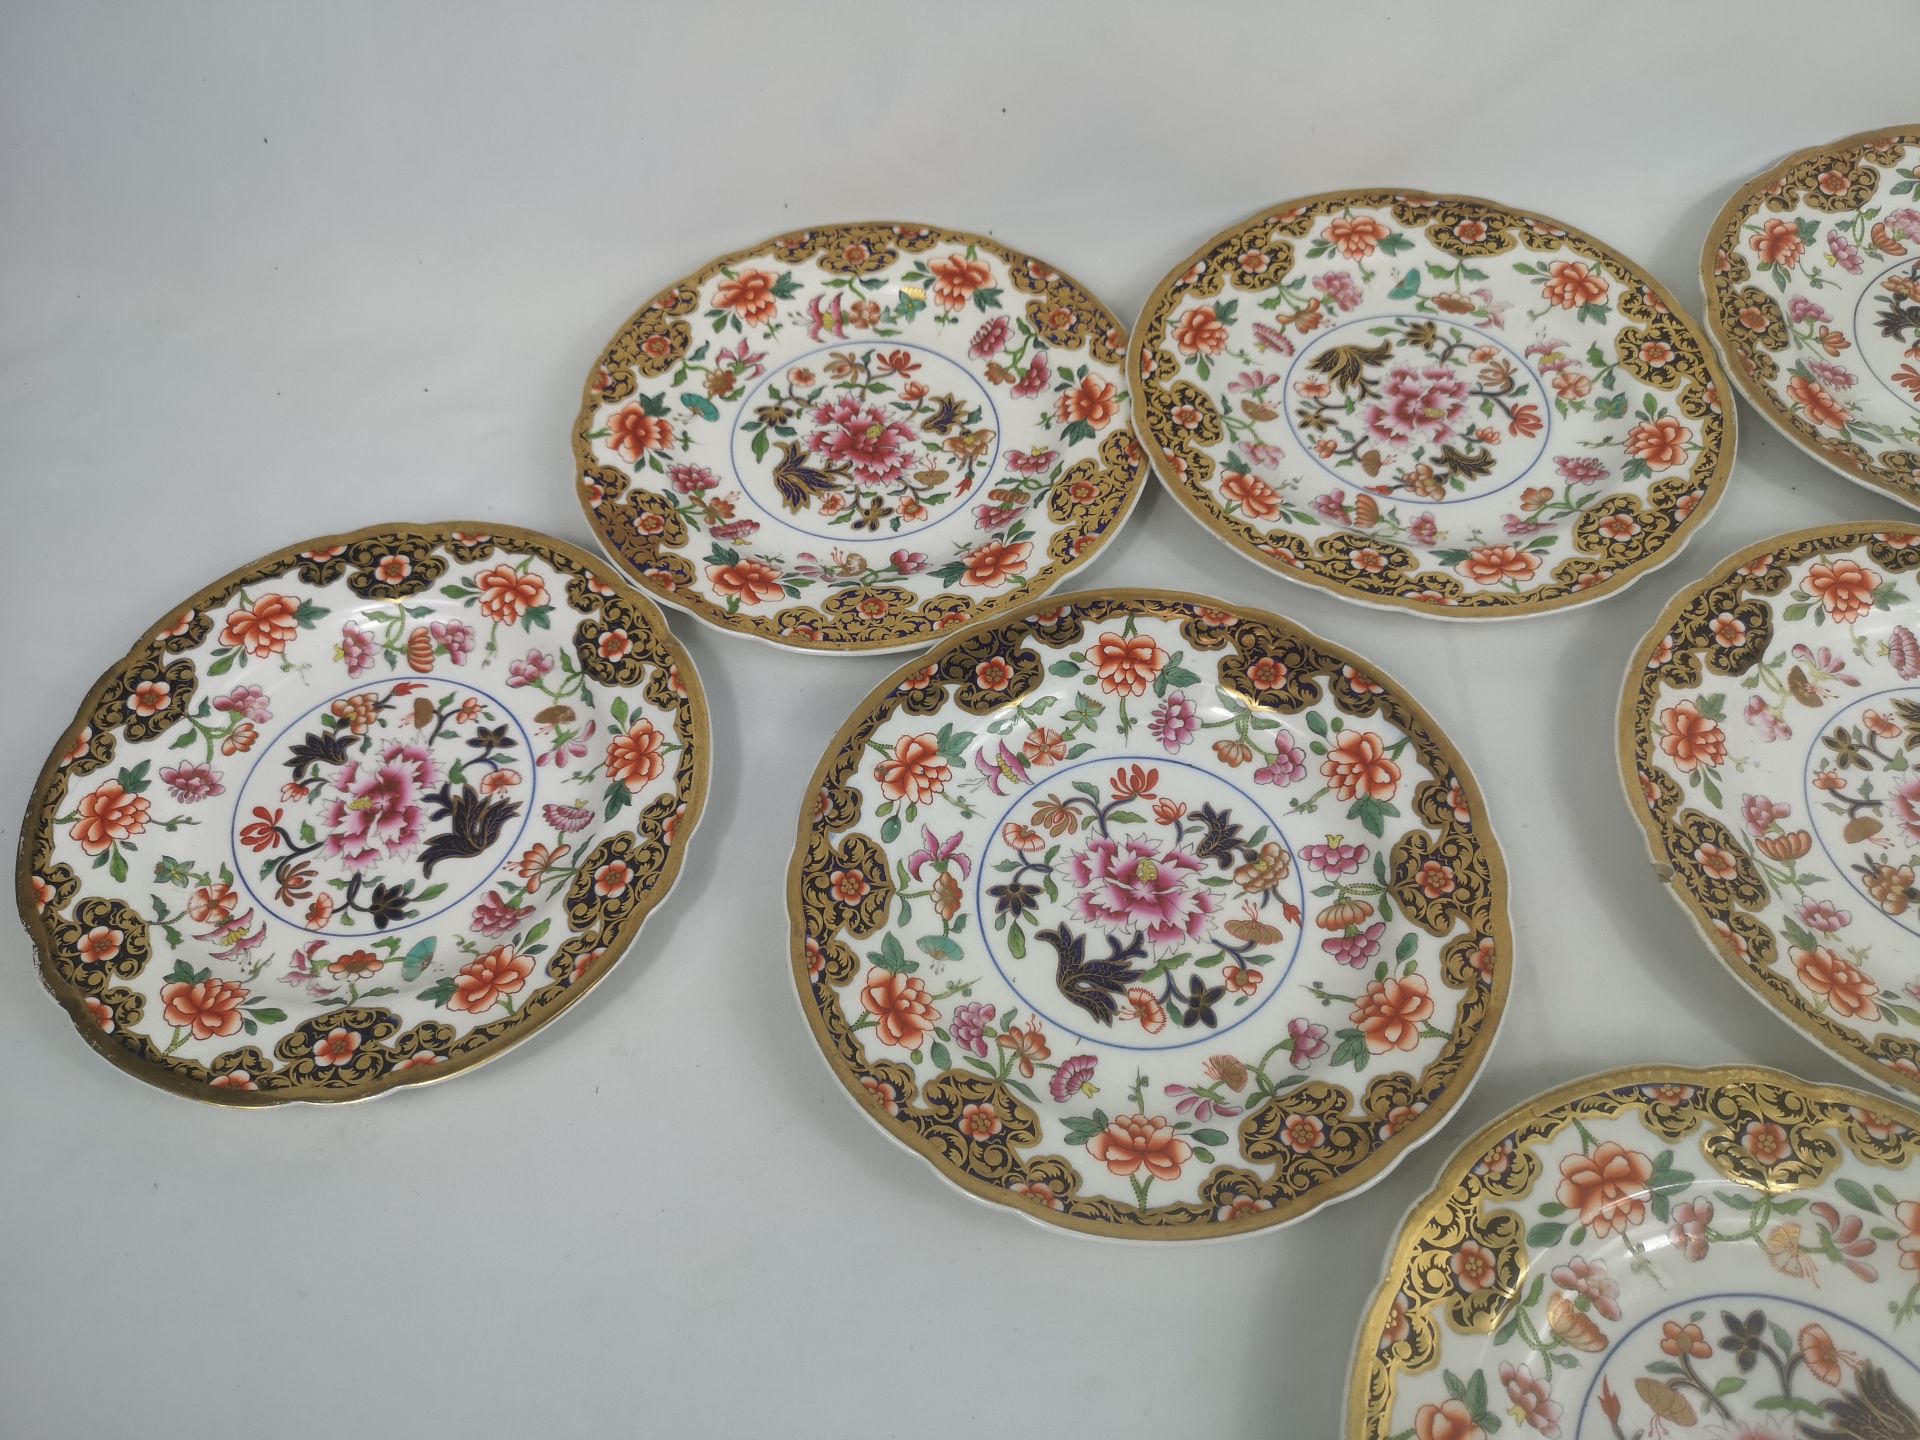 Eight 19th century Spode plates - Image 2 of 4